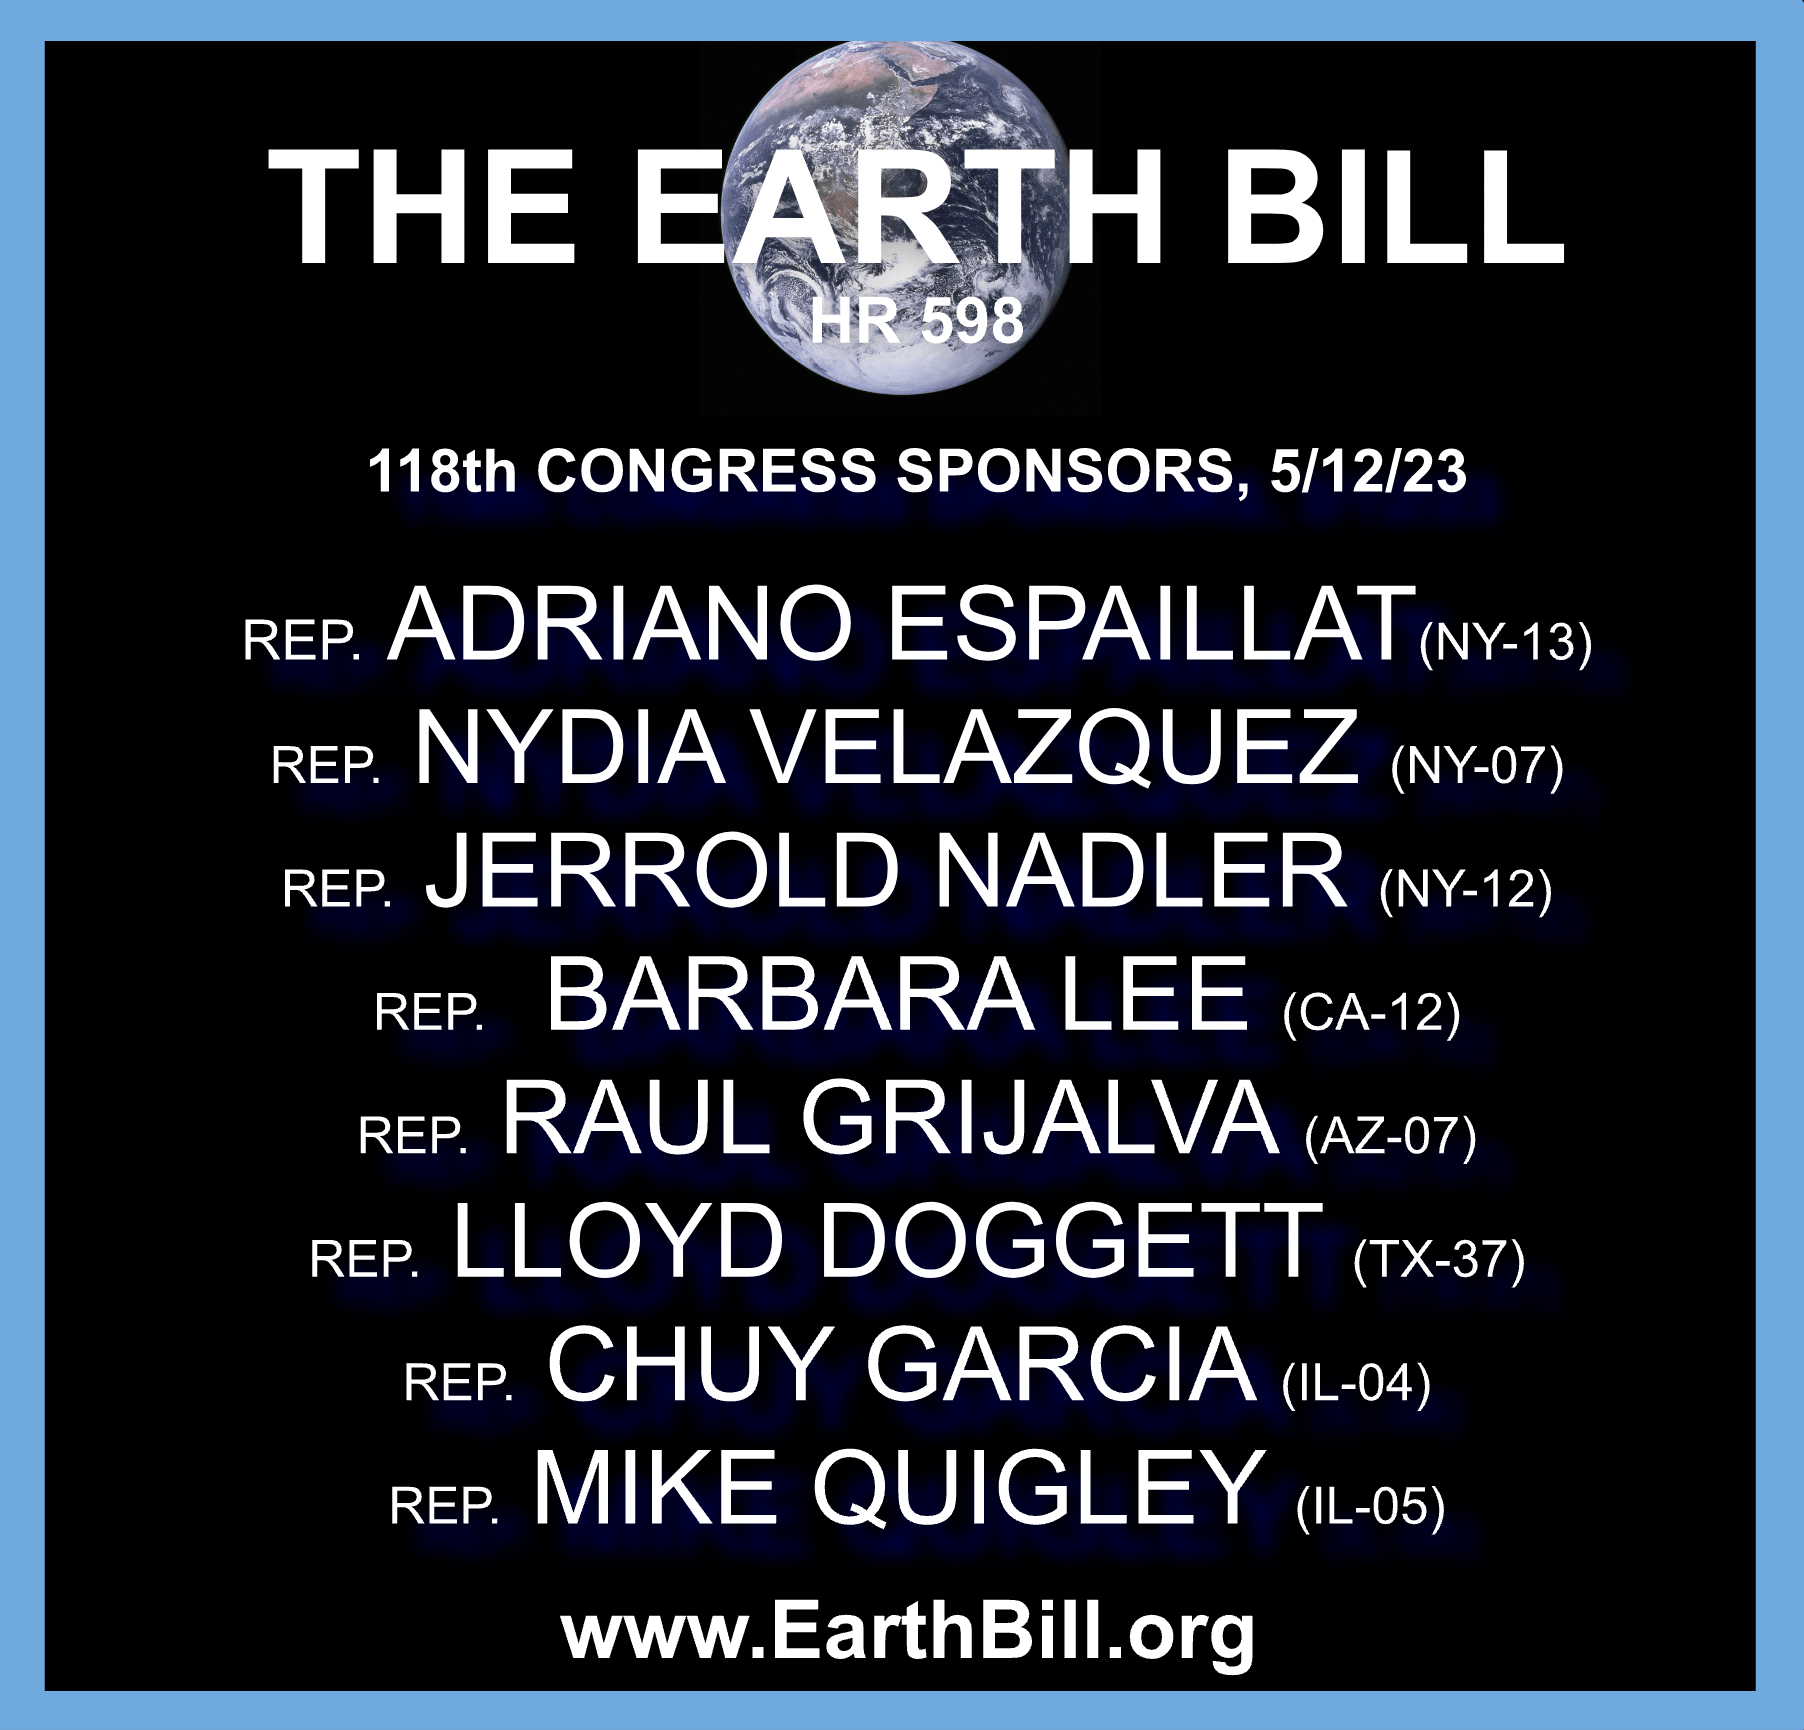 A list of sponsors for the earth bill HR598. The list has 8 sponsors for the 118th congress.